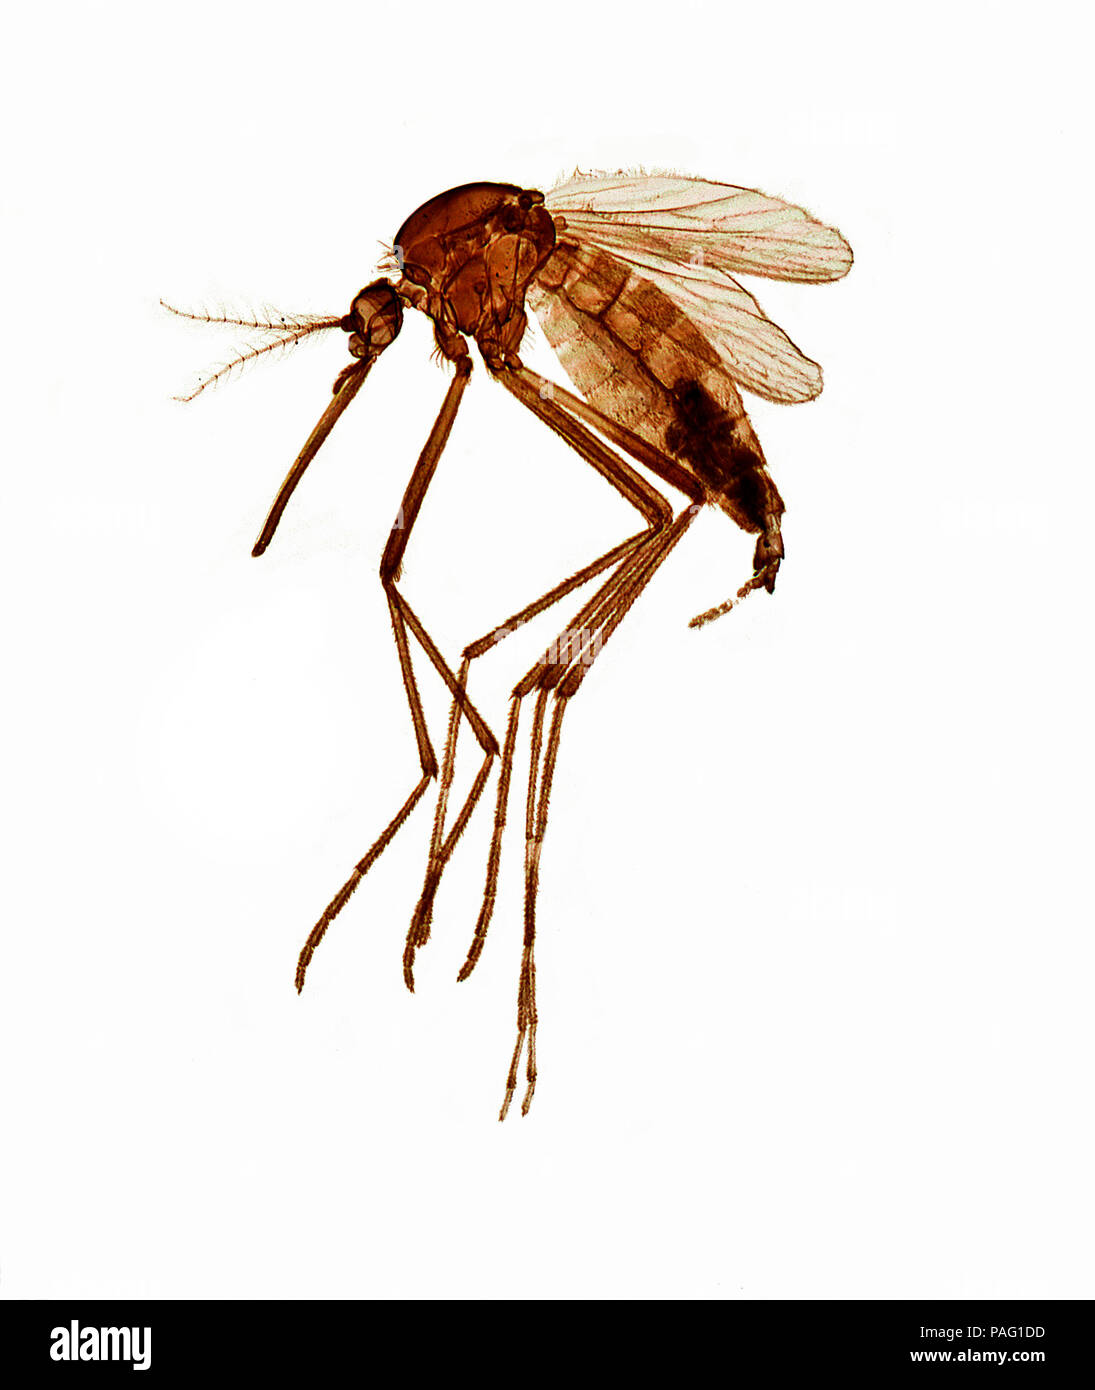 Aedes aegypti, the yellow fever mosquito, is a mosquito that can spread dengue fever, chikungunya, Zika fever, Mayaro and yellow fever viruses, and ot Stock Photo